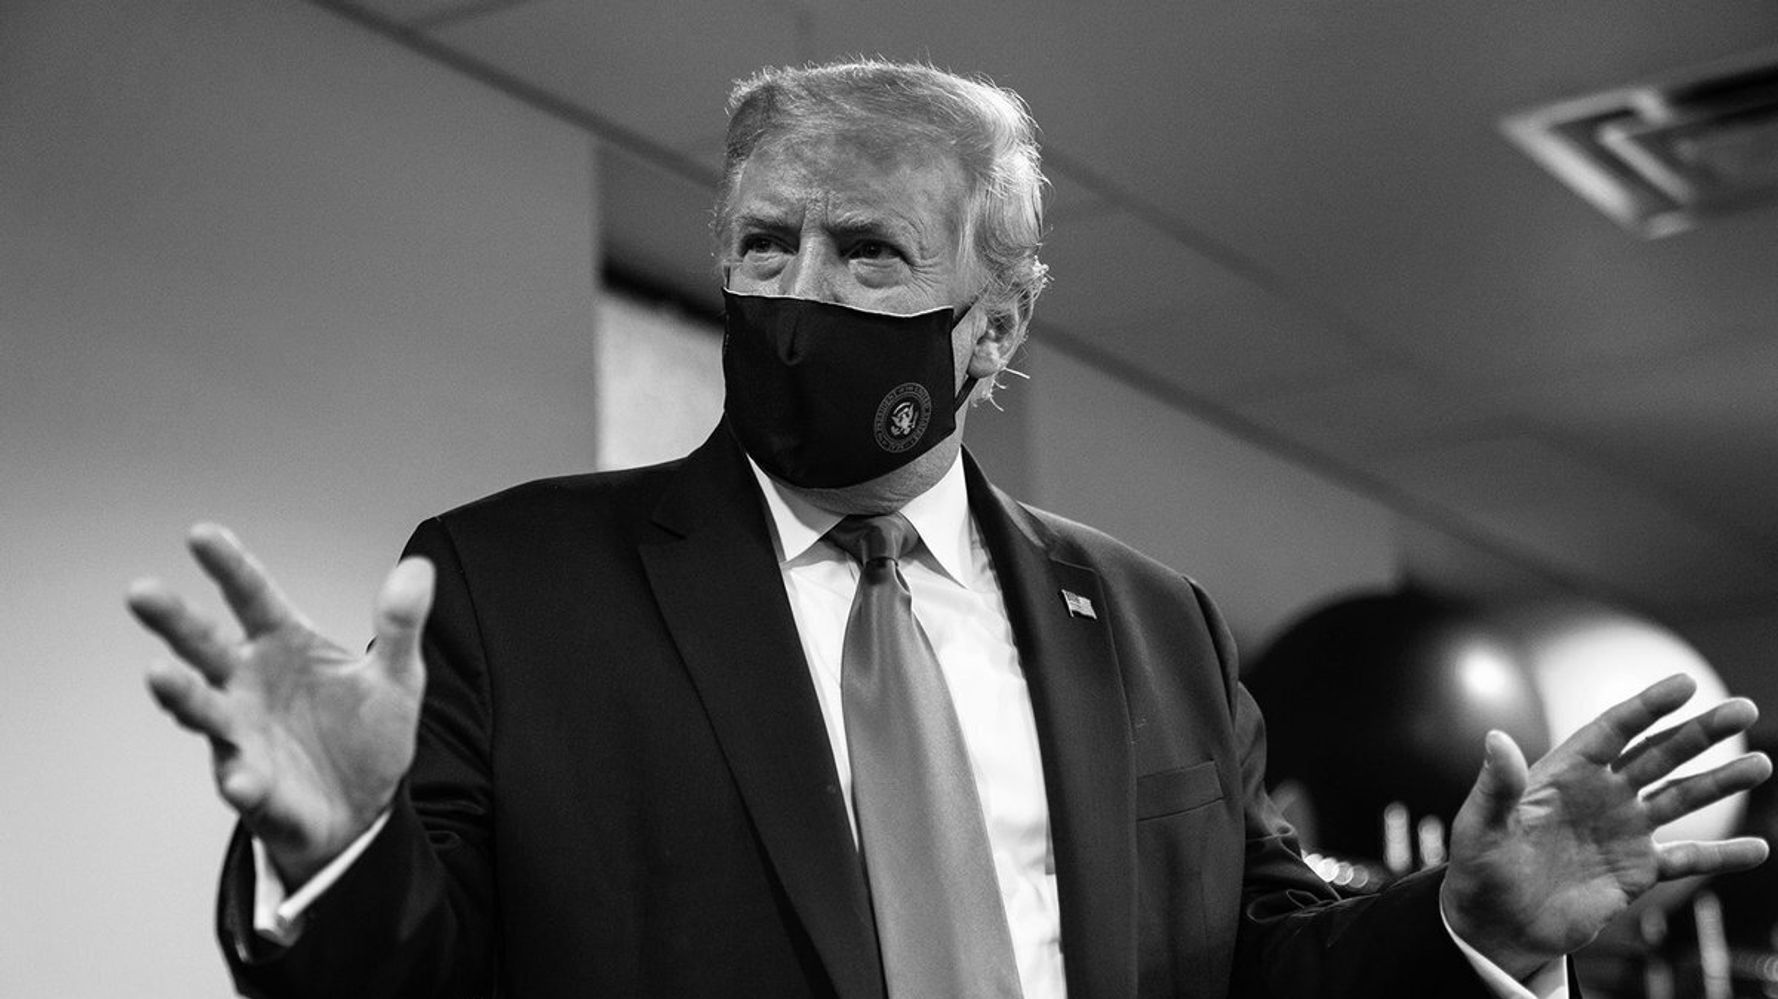 Trump Now Says Face Masks Are Patriotic But Twitter Users Aren't Impressed